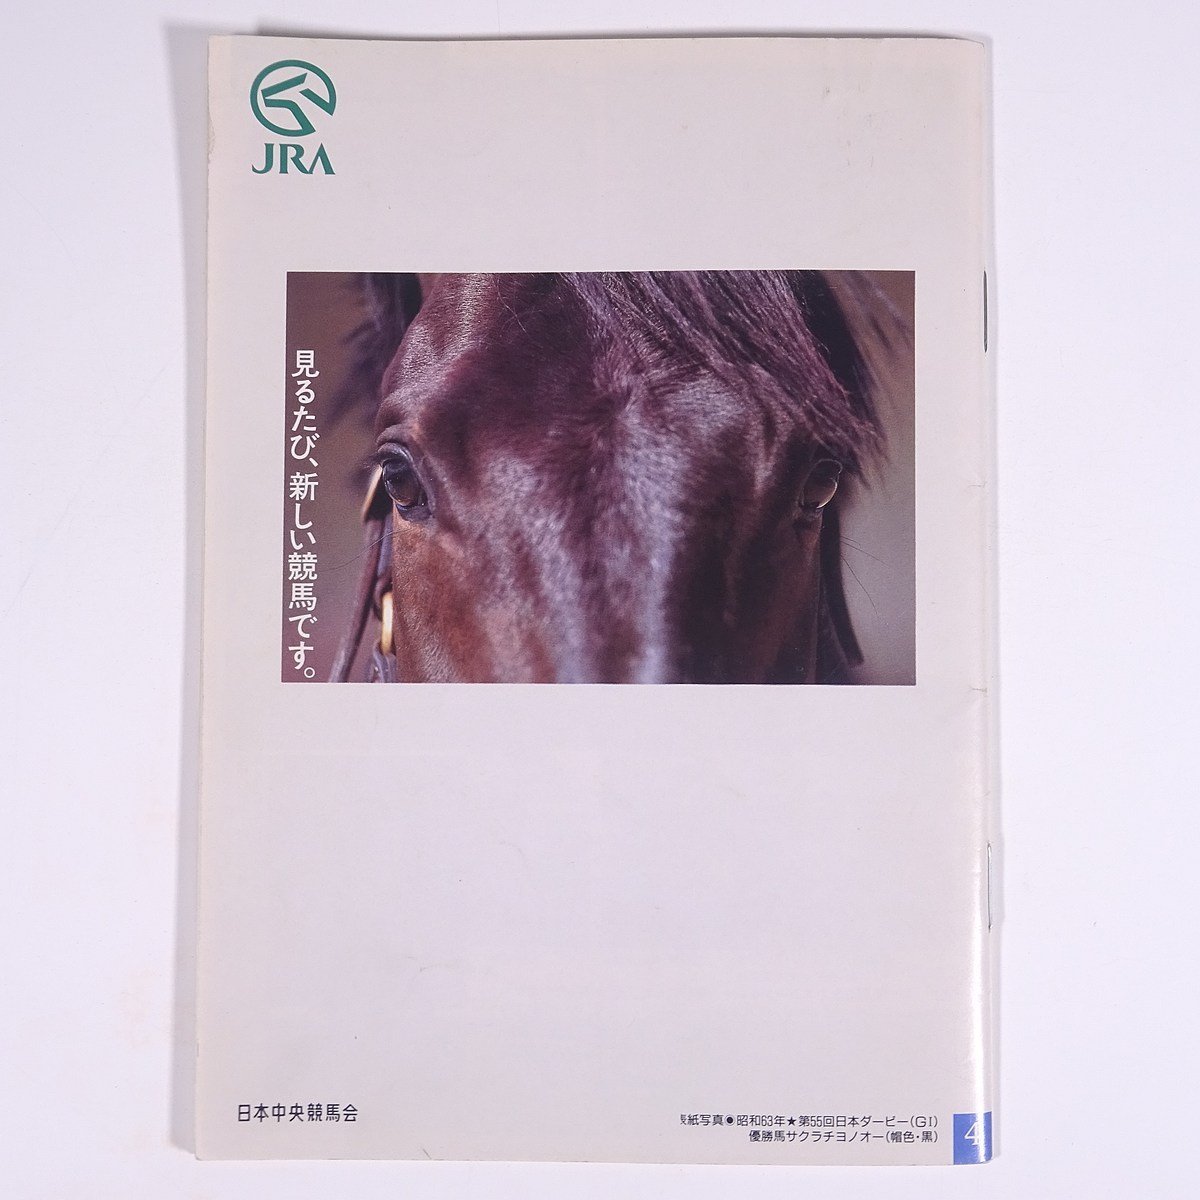 JRA Racing Program 1989/5/28 no. 56 times Japan Dubey (GⅠ) no. 3 times Hanshin horse racing no. 4 day small booklet pamphlet horse racing . horse table * writing equipped 